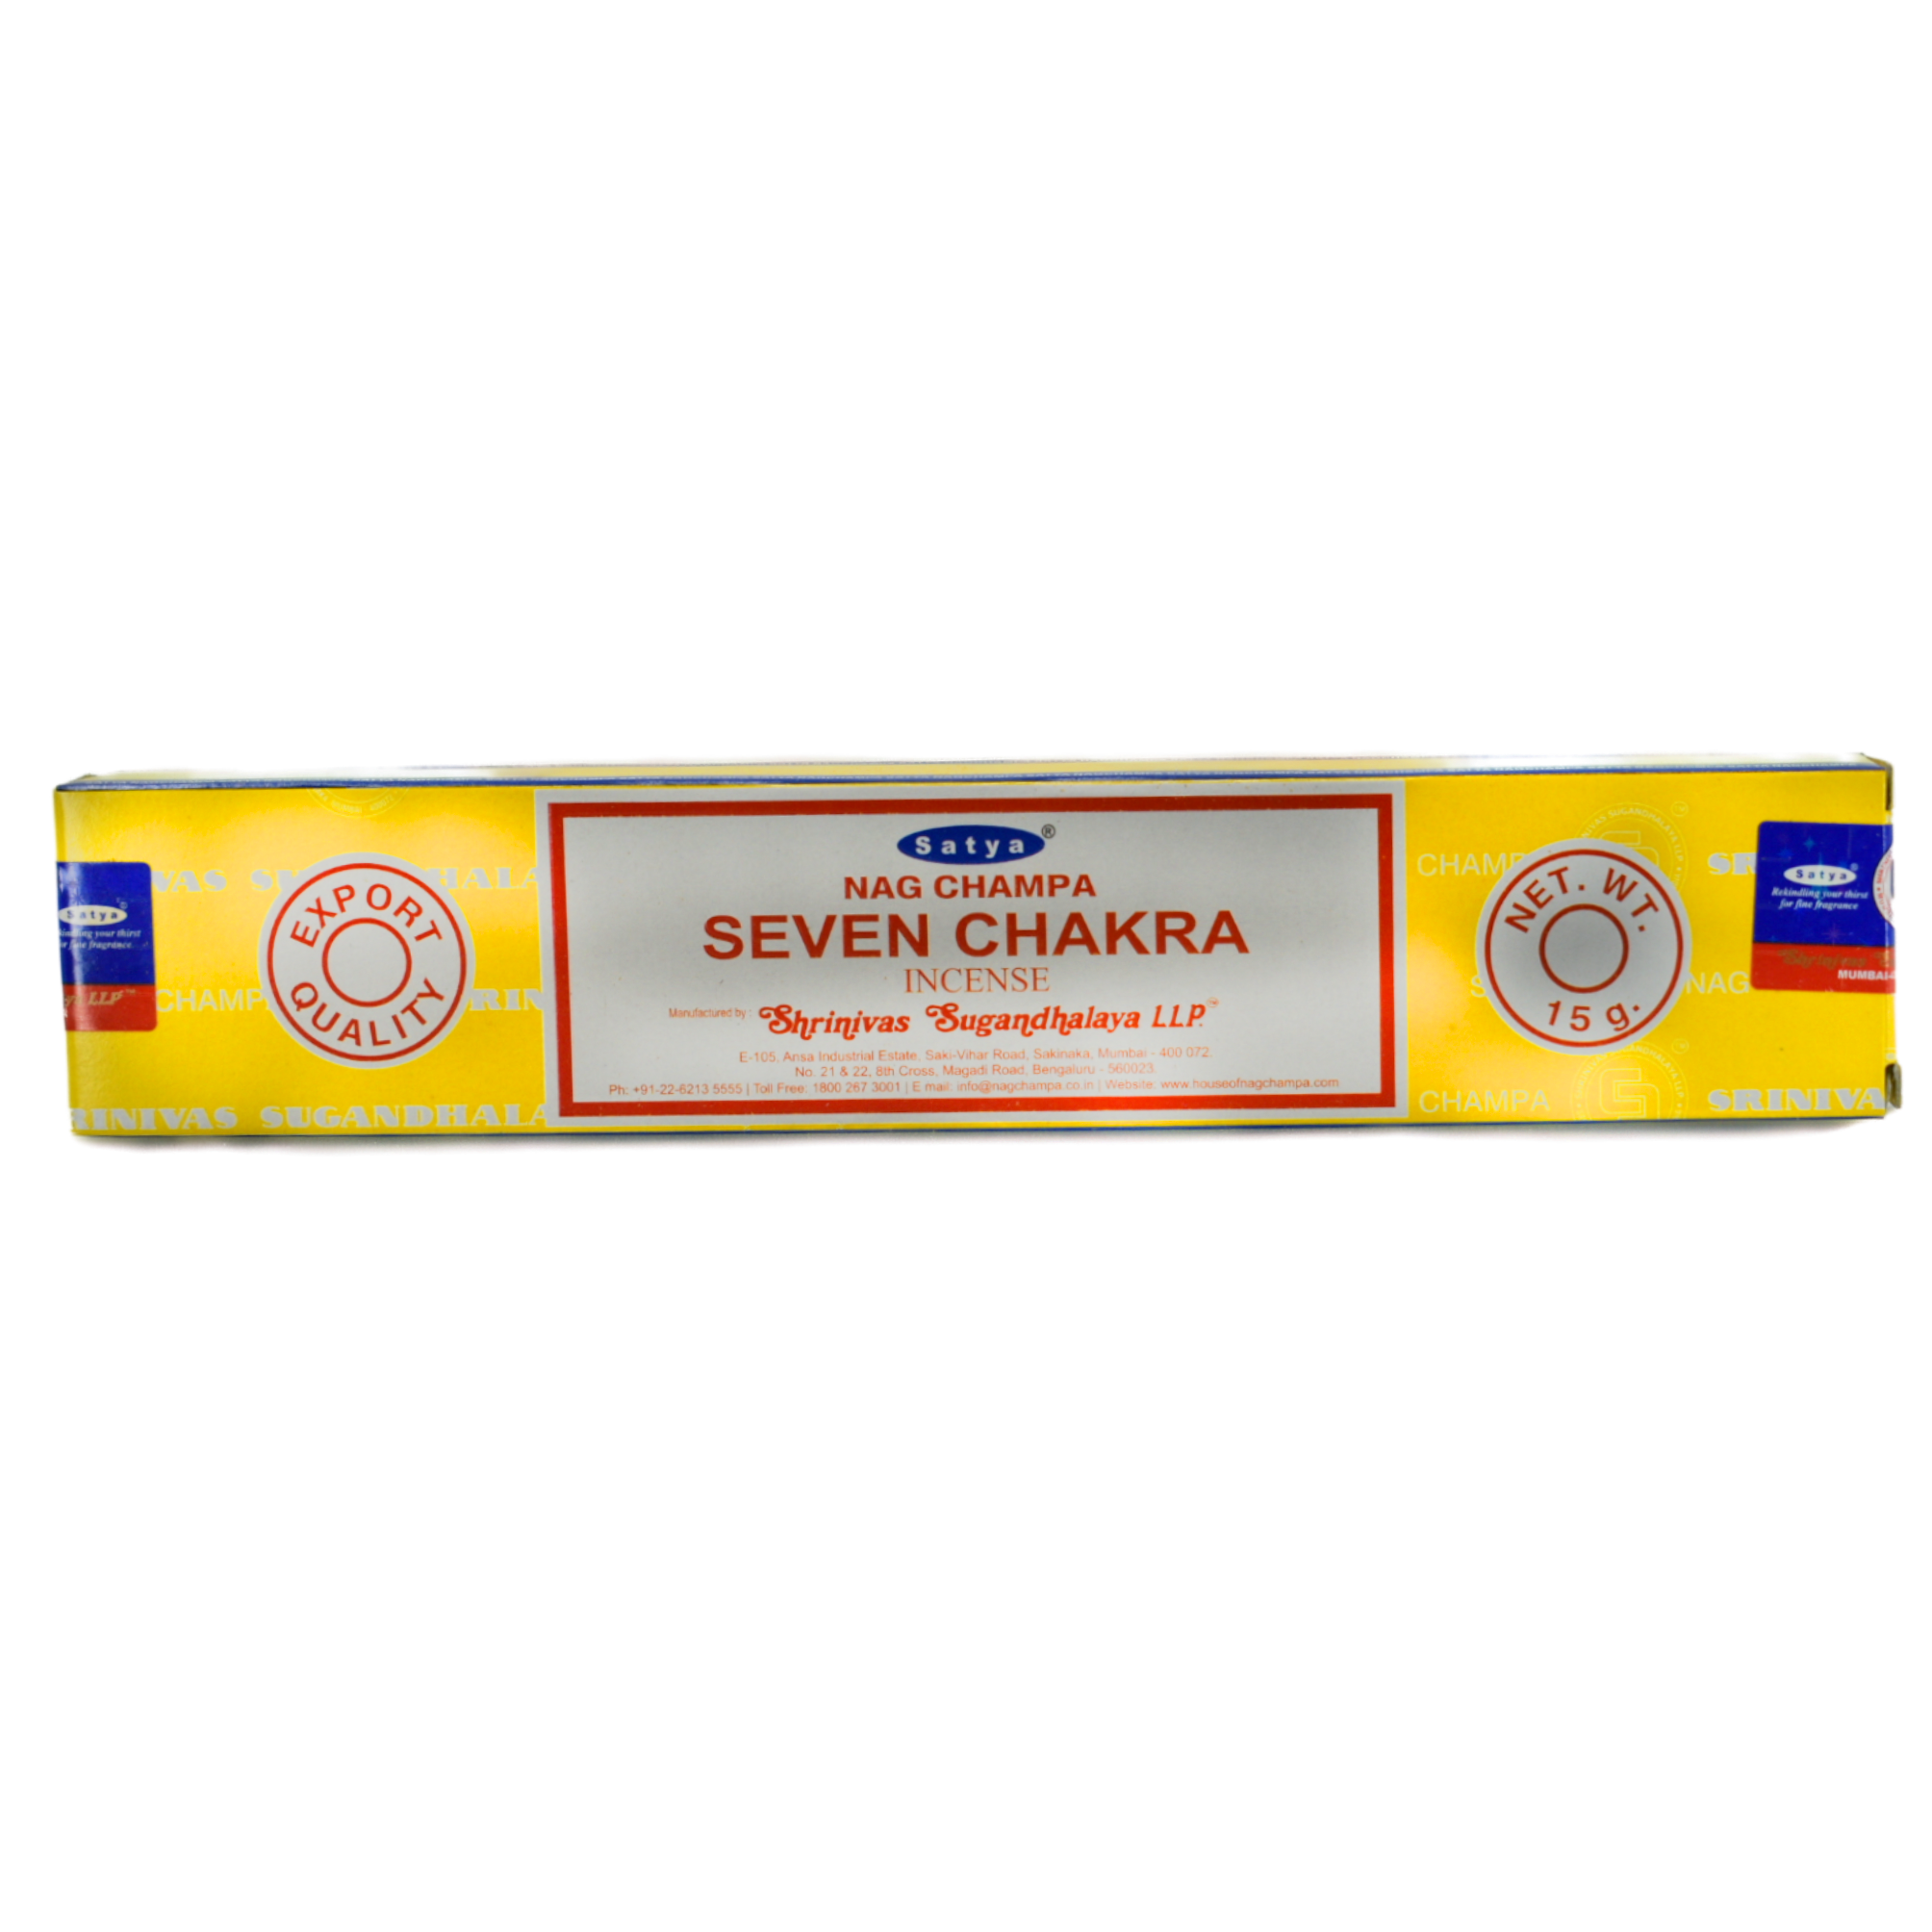 Seven Chakra 15 gram Incense Sticks.  The box is yellow with white lines running through it.  The white lines have company words on them.  The center has a white rectangle with a red frame within the border.  the top half of the rectangle has the company name and the title listed; Satya, Nag Champa, Seven Chakra Incense.  On both sides of the rectangle is a circle.  The left circle says Export Quality and the right circle says Net. Weight 15 grams.  